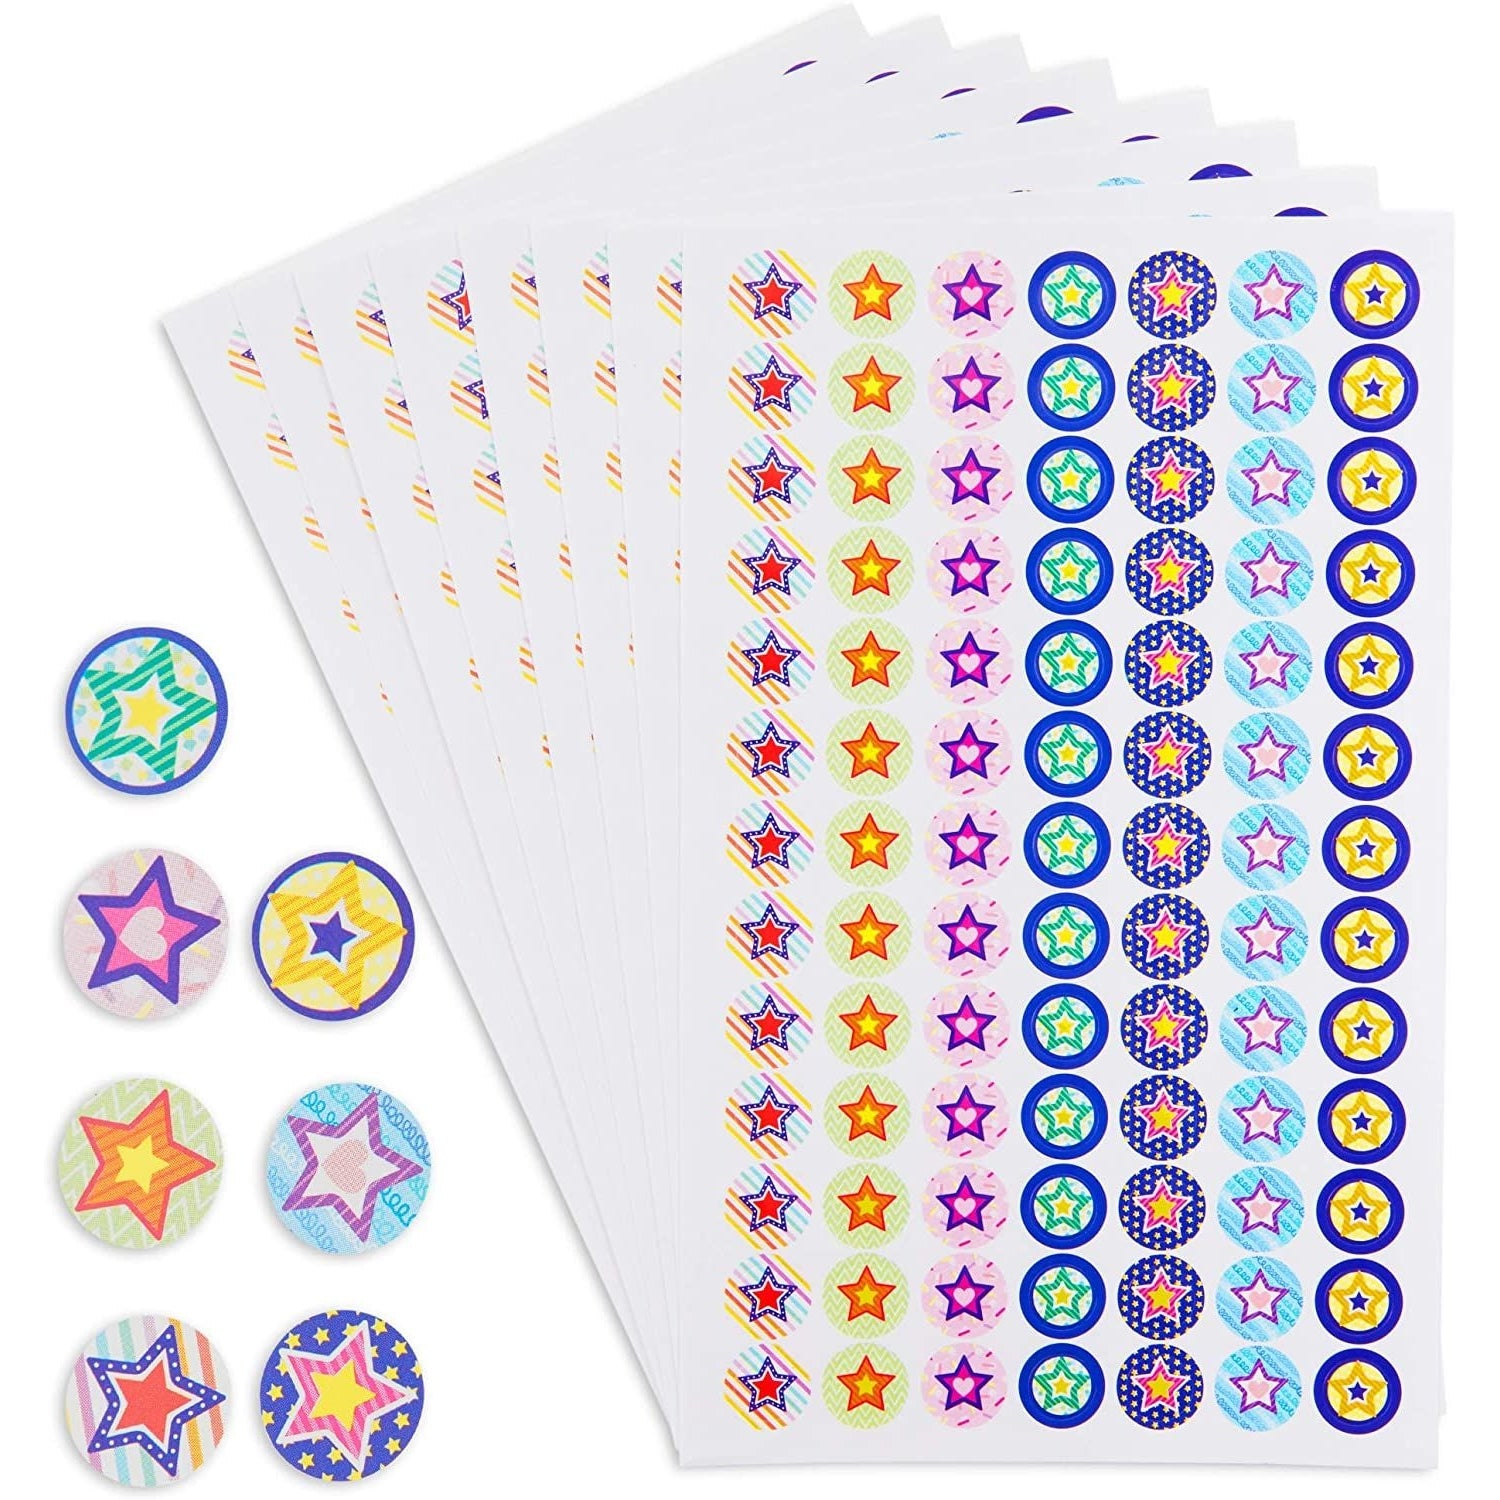 Graduation Stickers for Envelopes, Self Adhesive Gold Decals (1.5